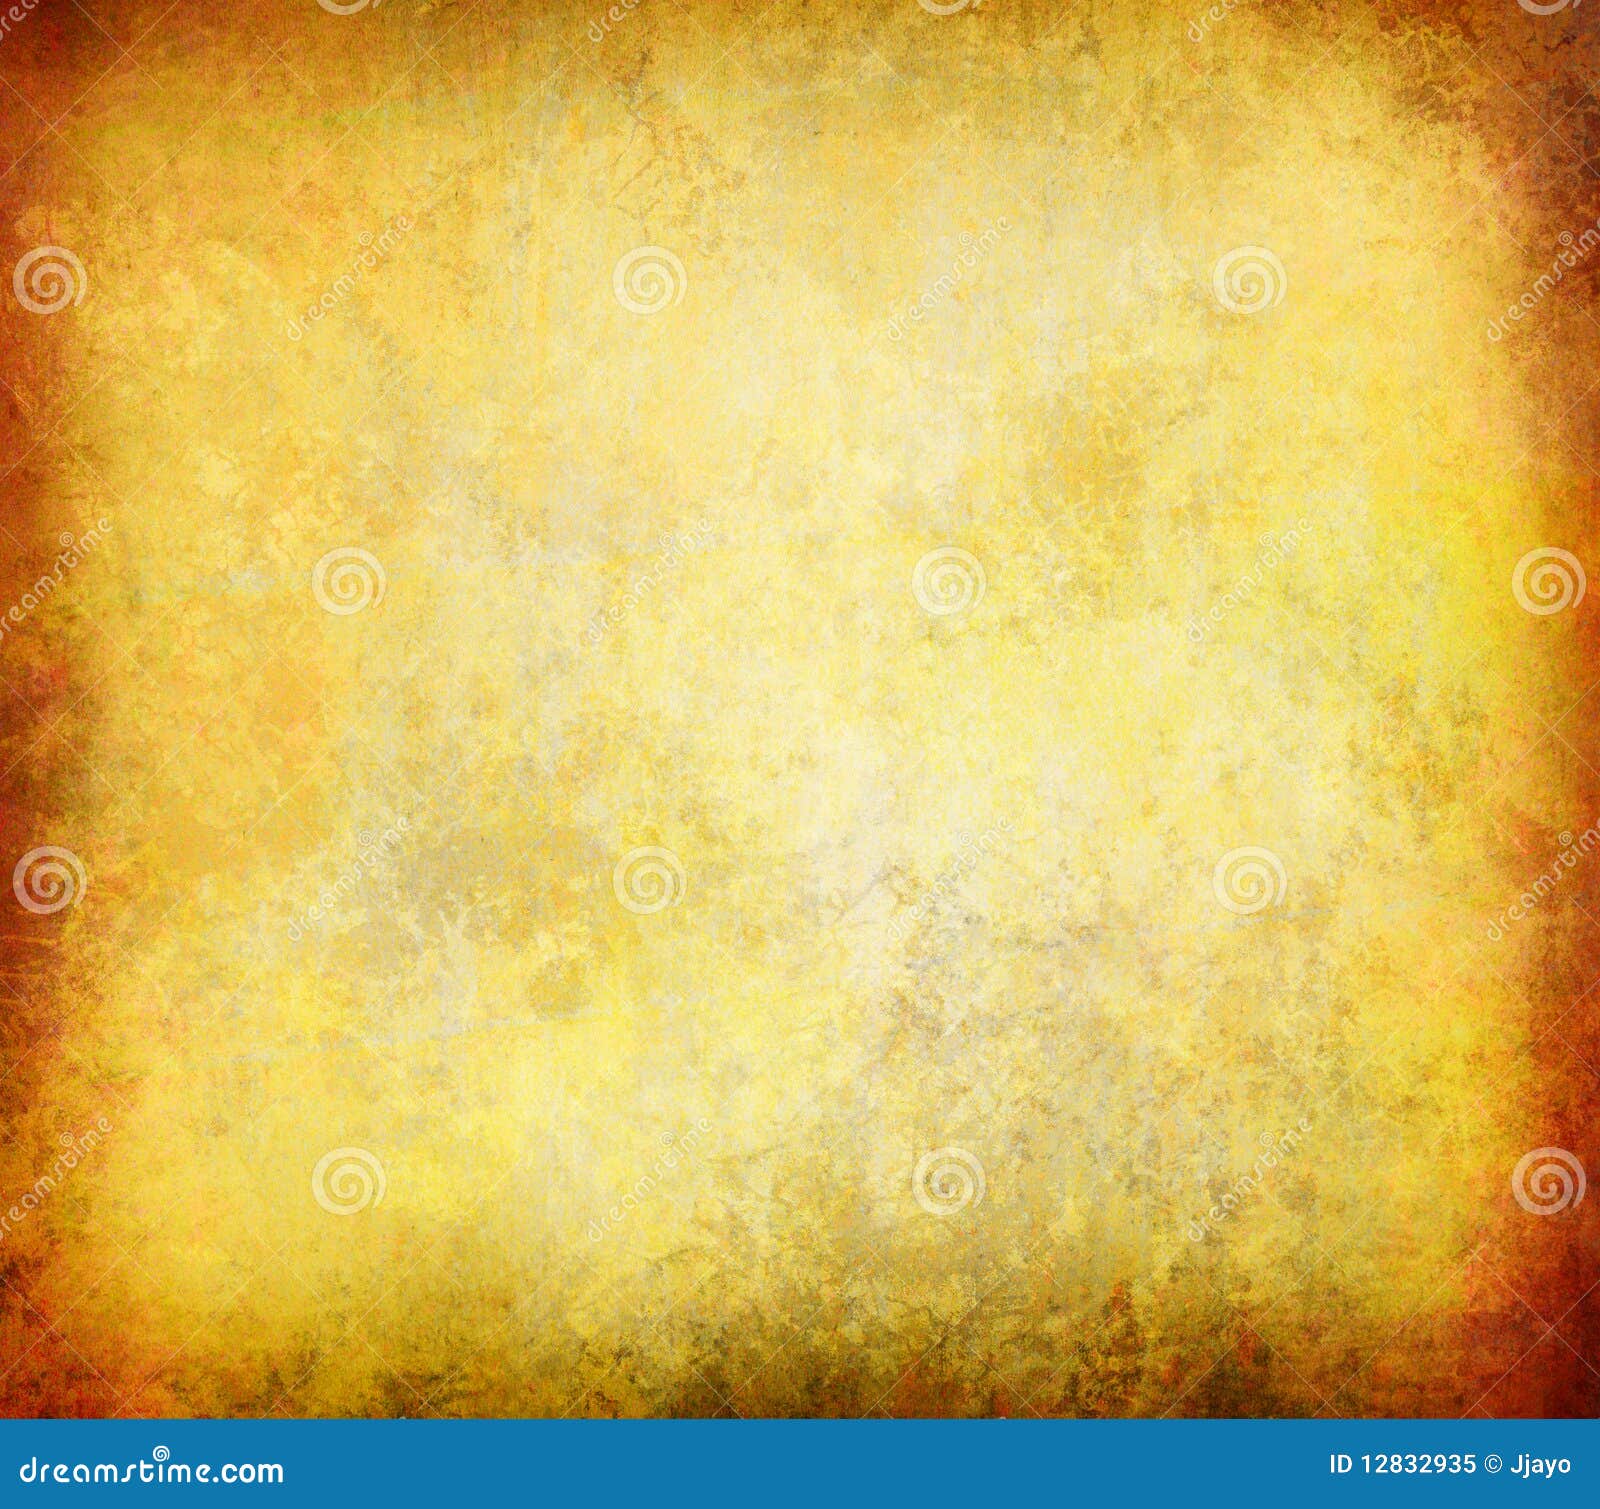 Abstract Yellow Grunge Background Stock Image - Image of edges, backdrop:  12832935